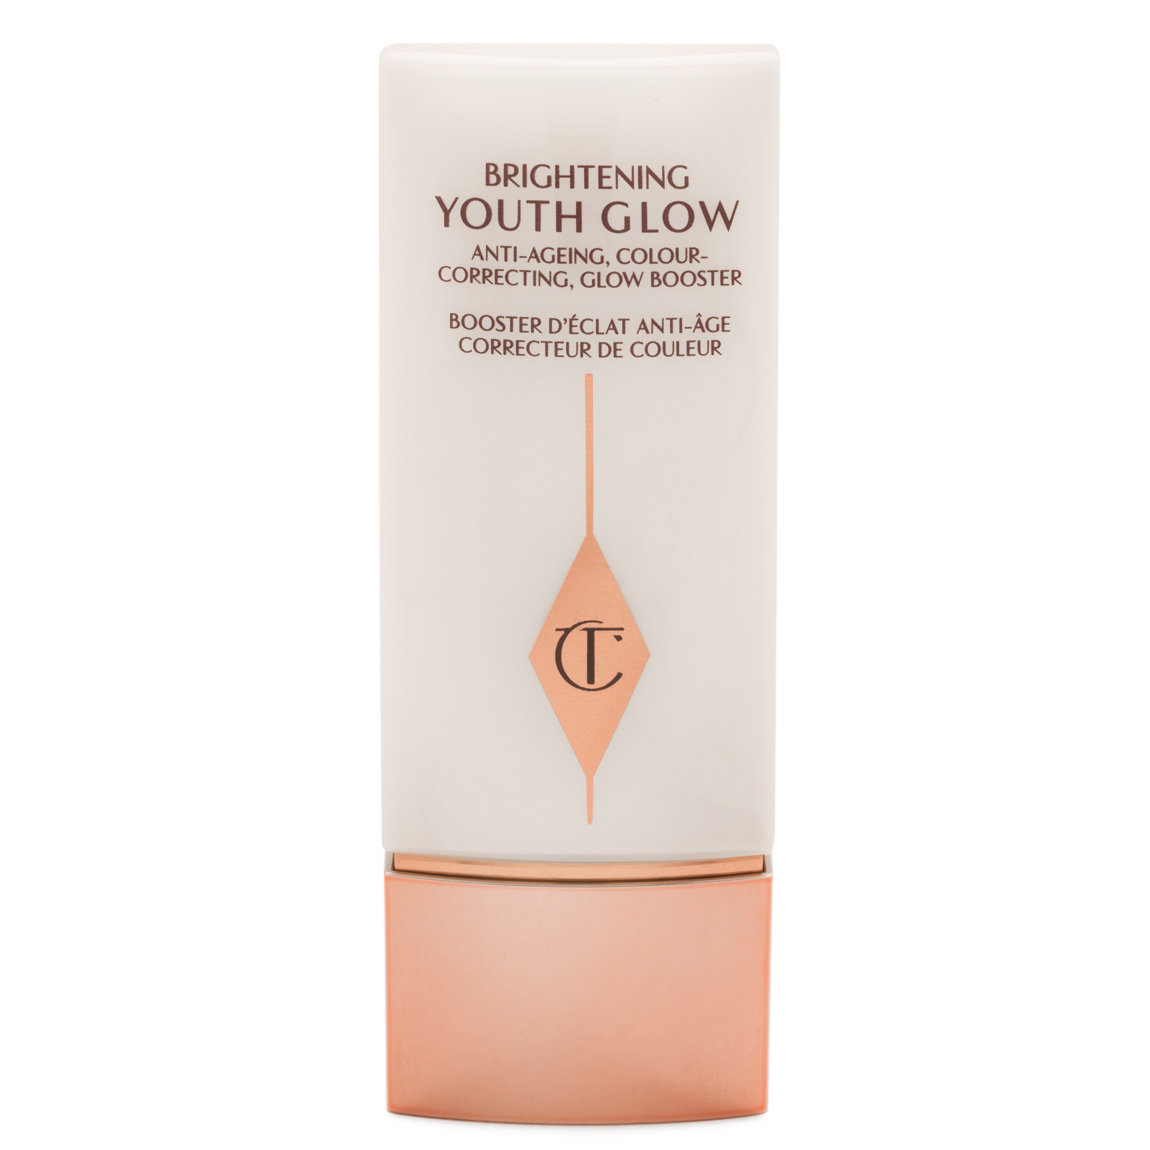 Charlotte Tilbury Brightening Youth Glow alternative view 1 - product swatch.